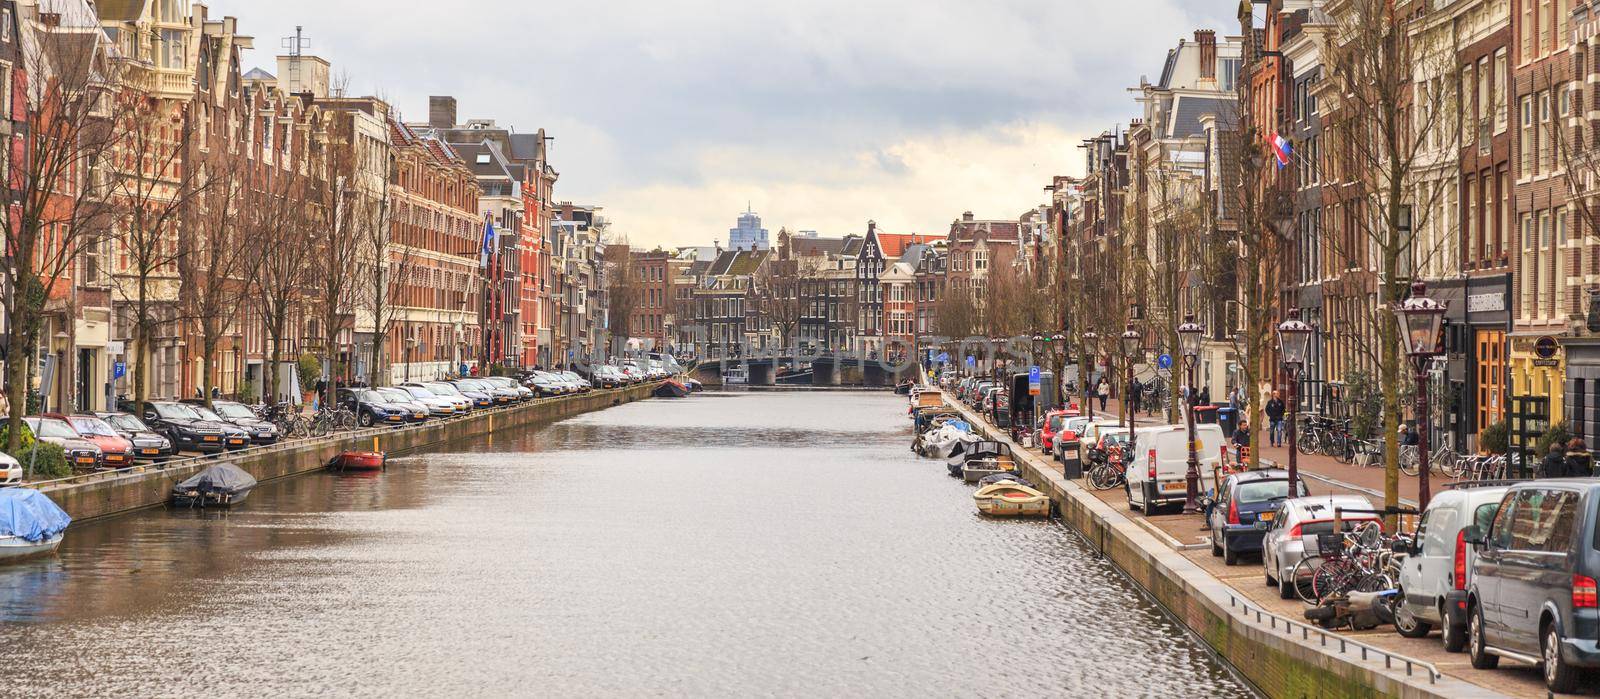 AMSTERDAM, NETHERLANDS - MARCH 15: Streets of the city with canals, on March 15, 2014 in Amsterdam